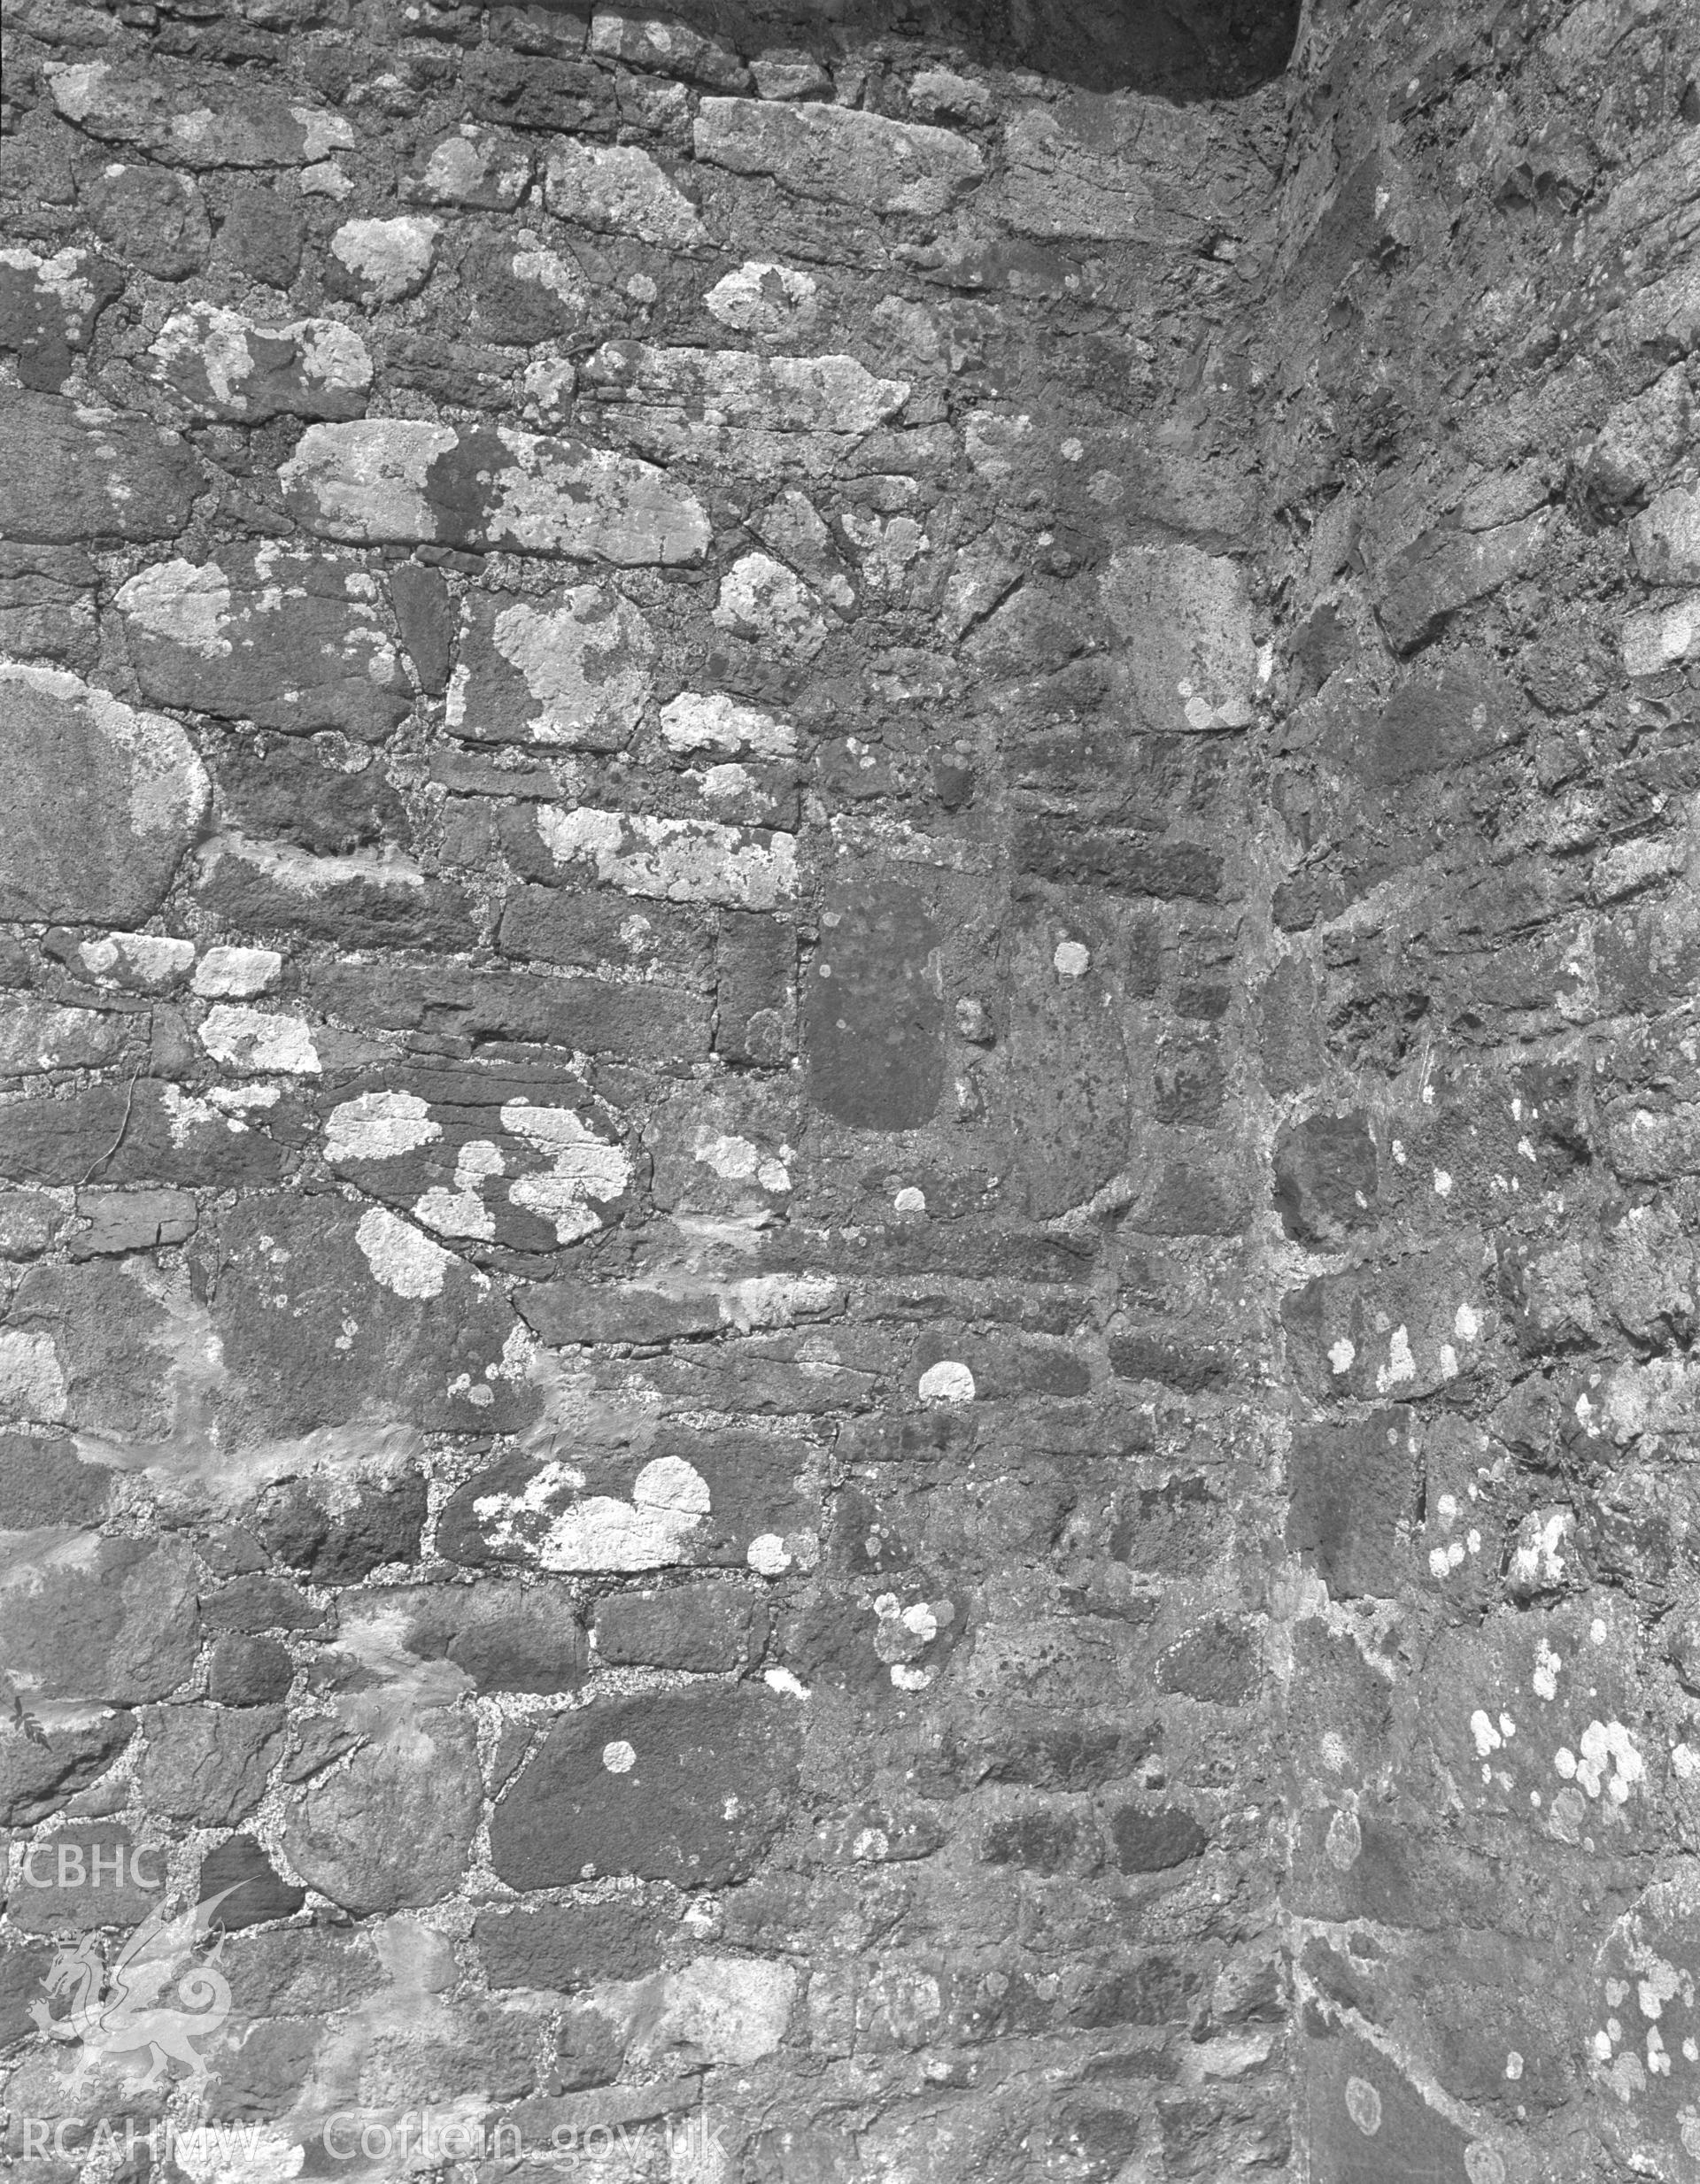 Black and white nitrate negative showing exterior stonework at Llaniestyn Church.